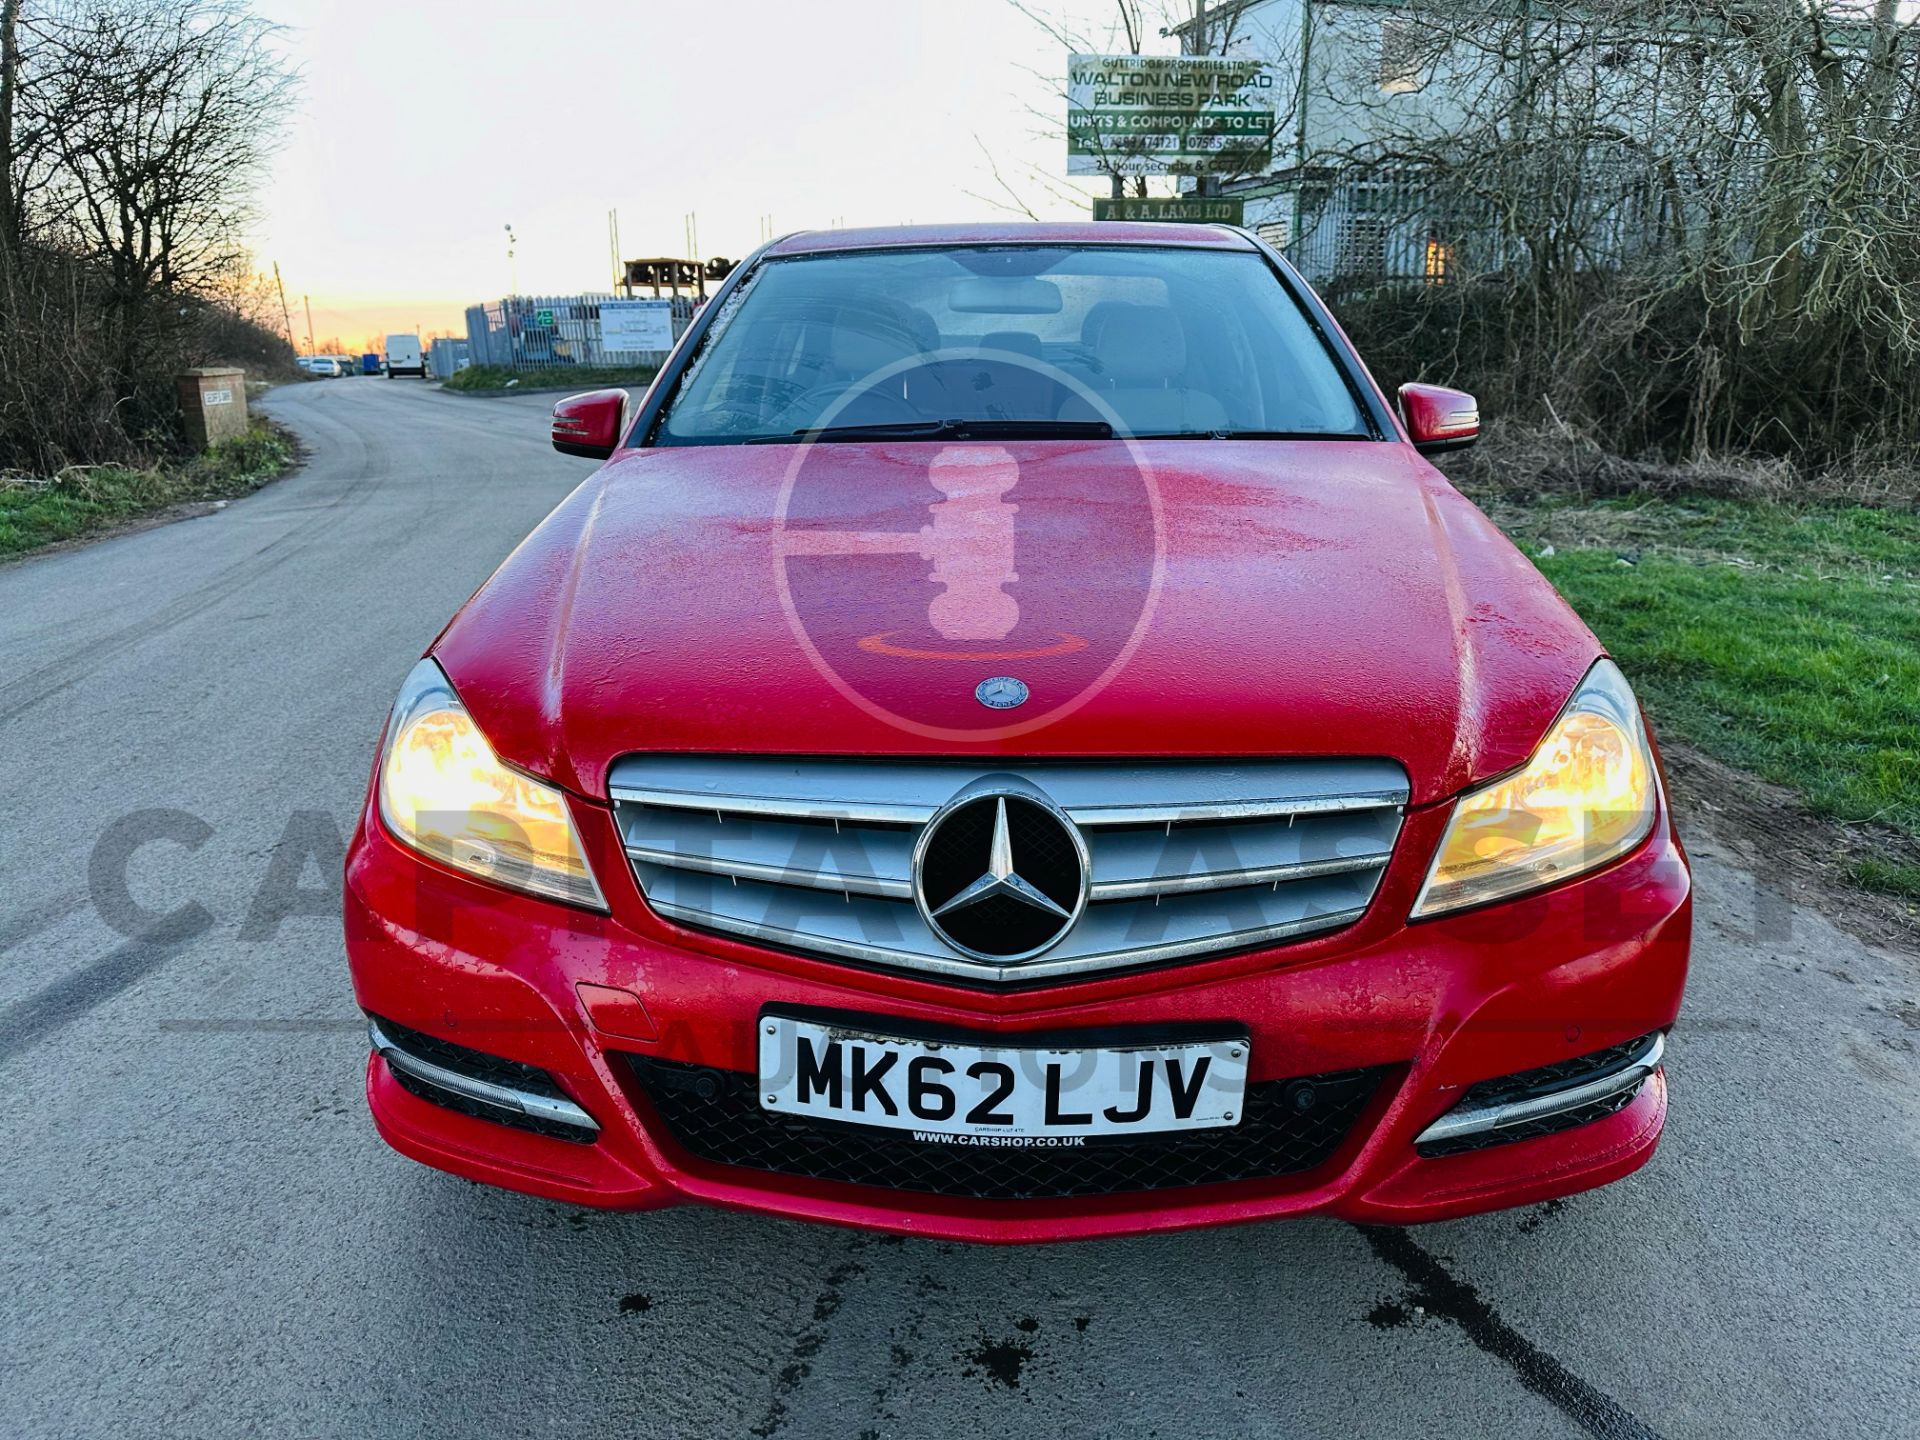 (ON SALE) MERCEDES-BENZ C220 2.1Cdi BLUE EFFICIENCY STOP/START FULL LEATHER INTERIOR NO VAT - Image 3 of 32